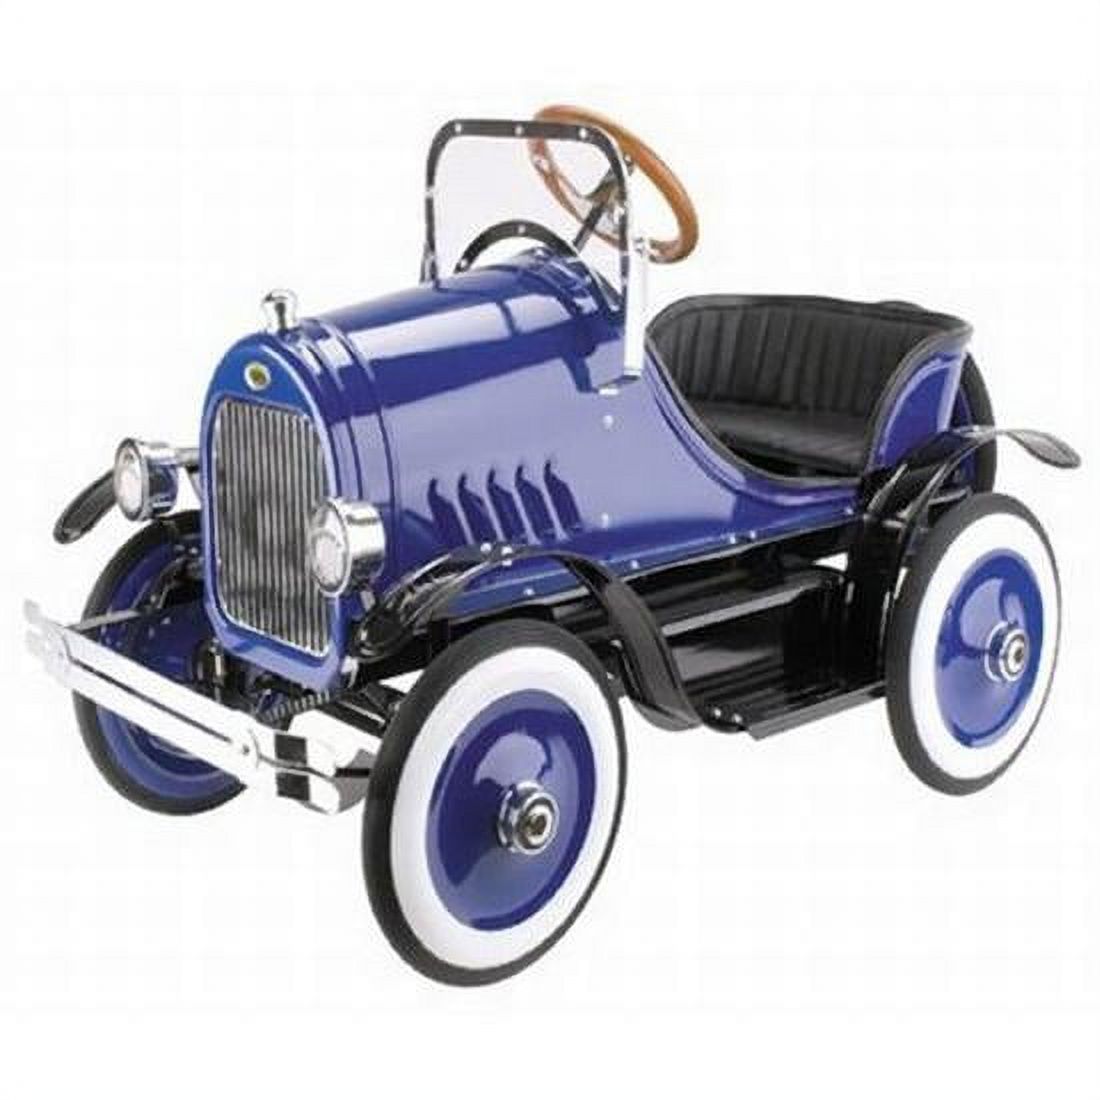 Model A Roadster Pedal Car, Blue - image 1 of 4